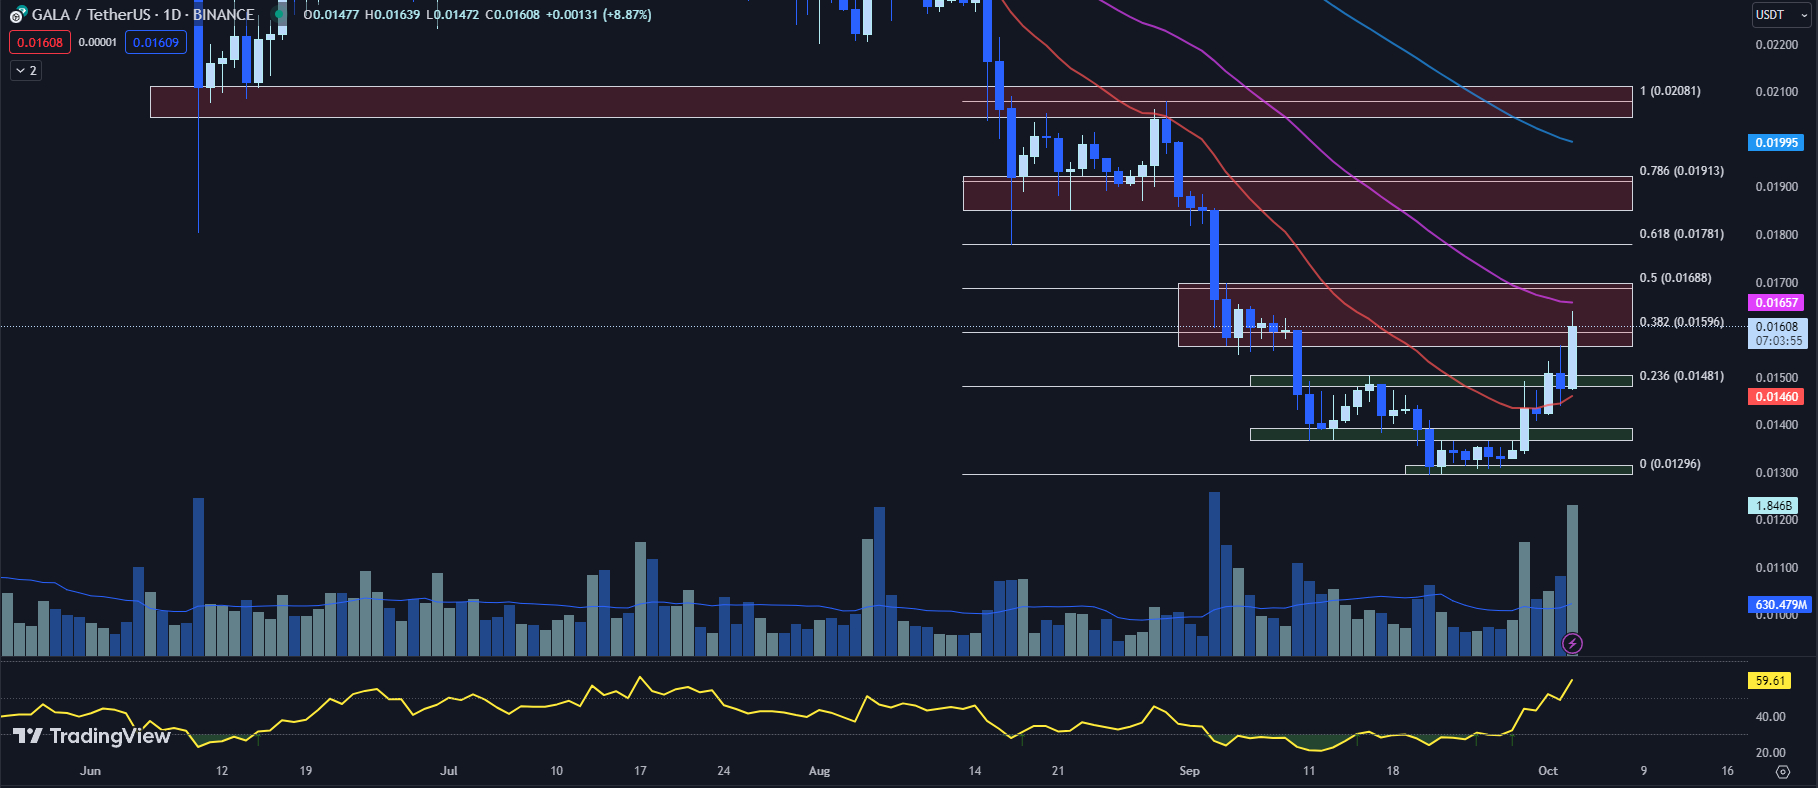 TradingView chart for the GALA price 10-04-23